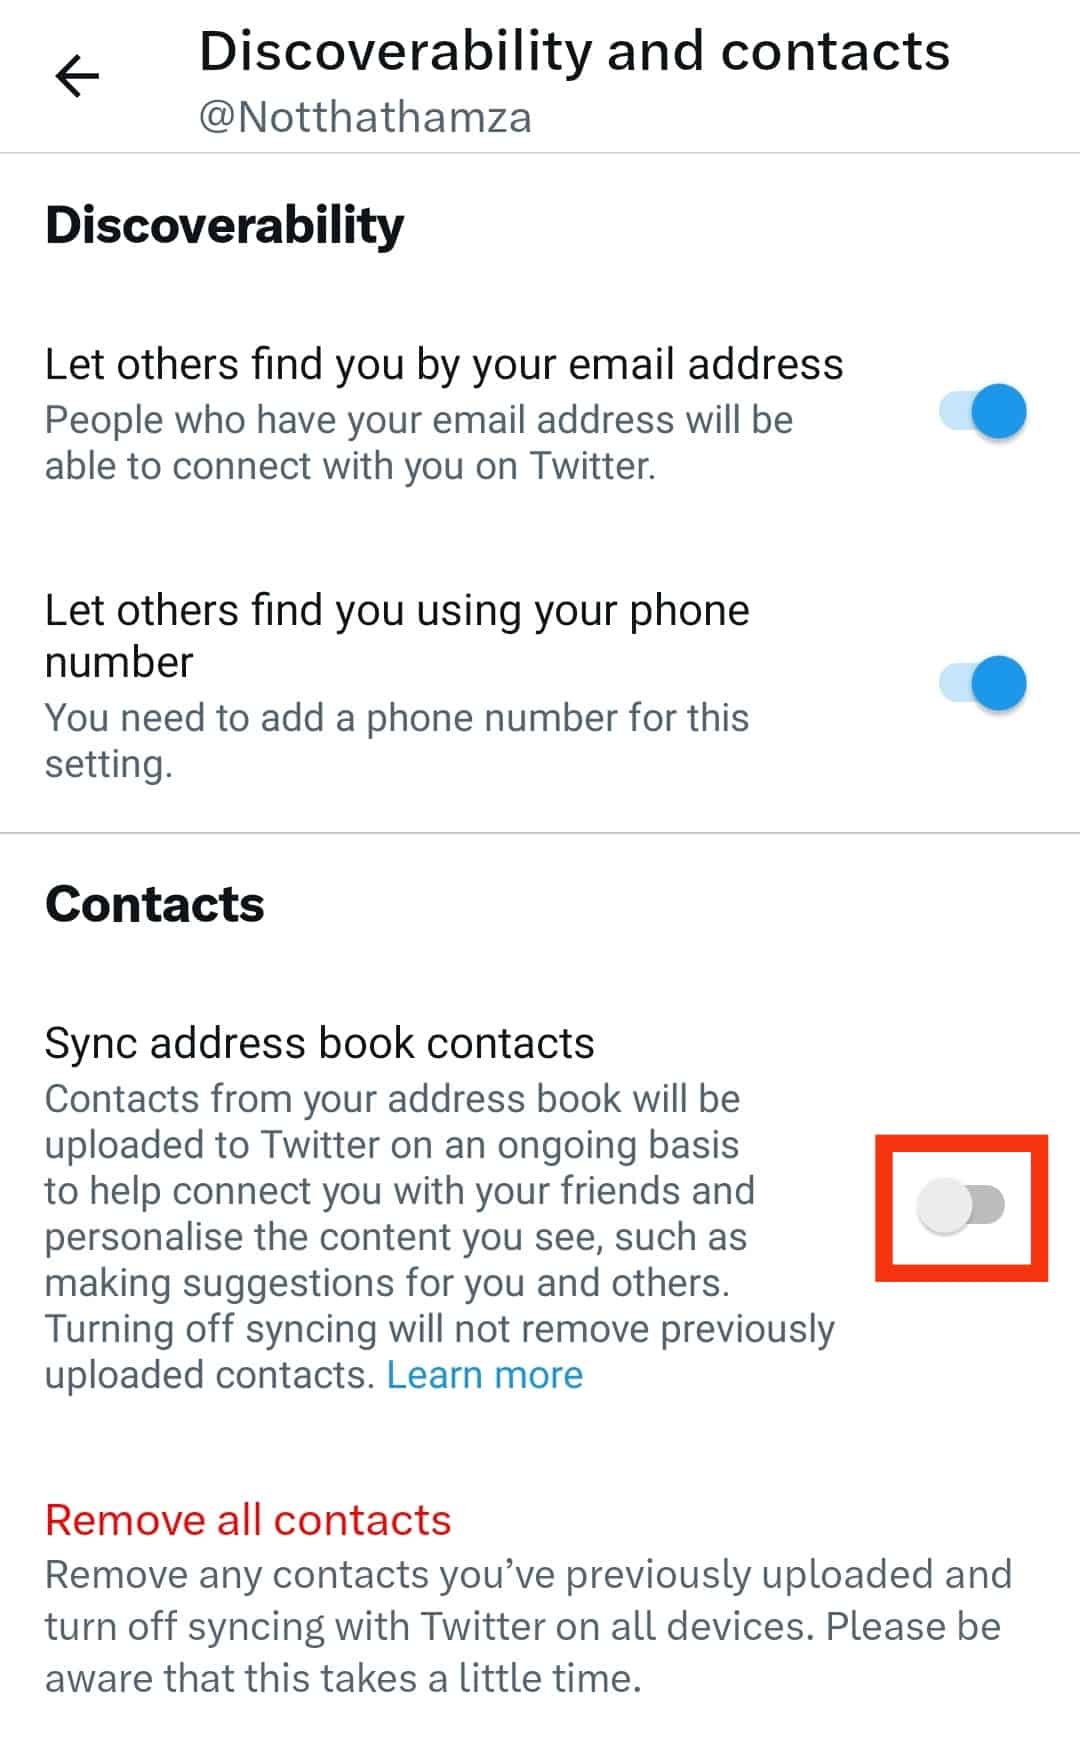 Toggle On The 'Sync Address Book Contacts'